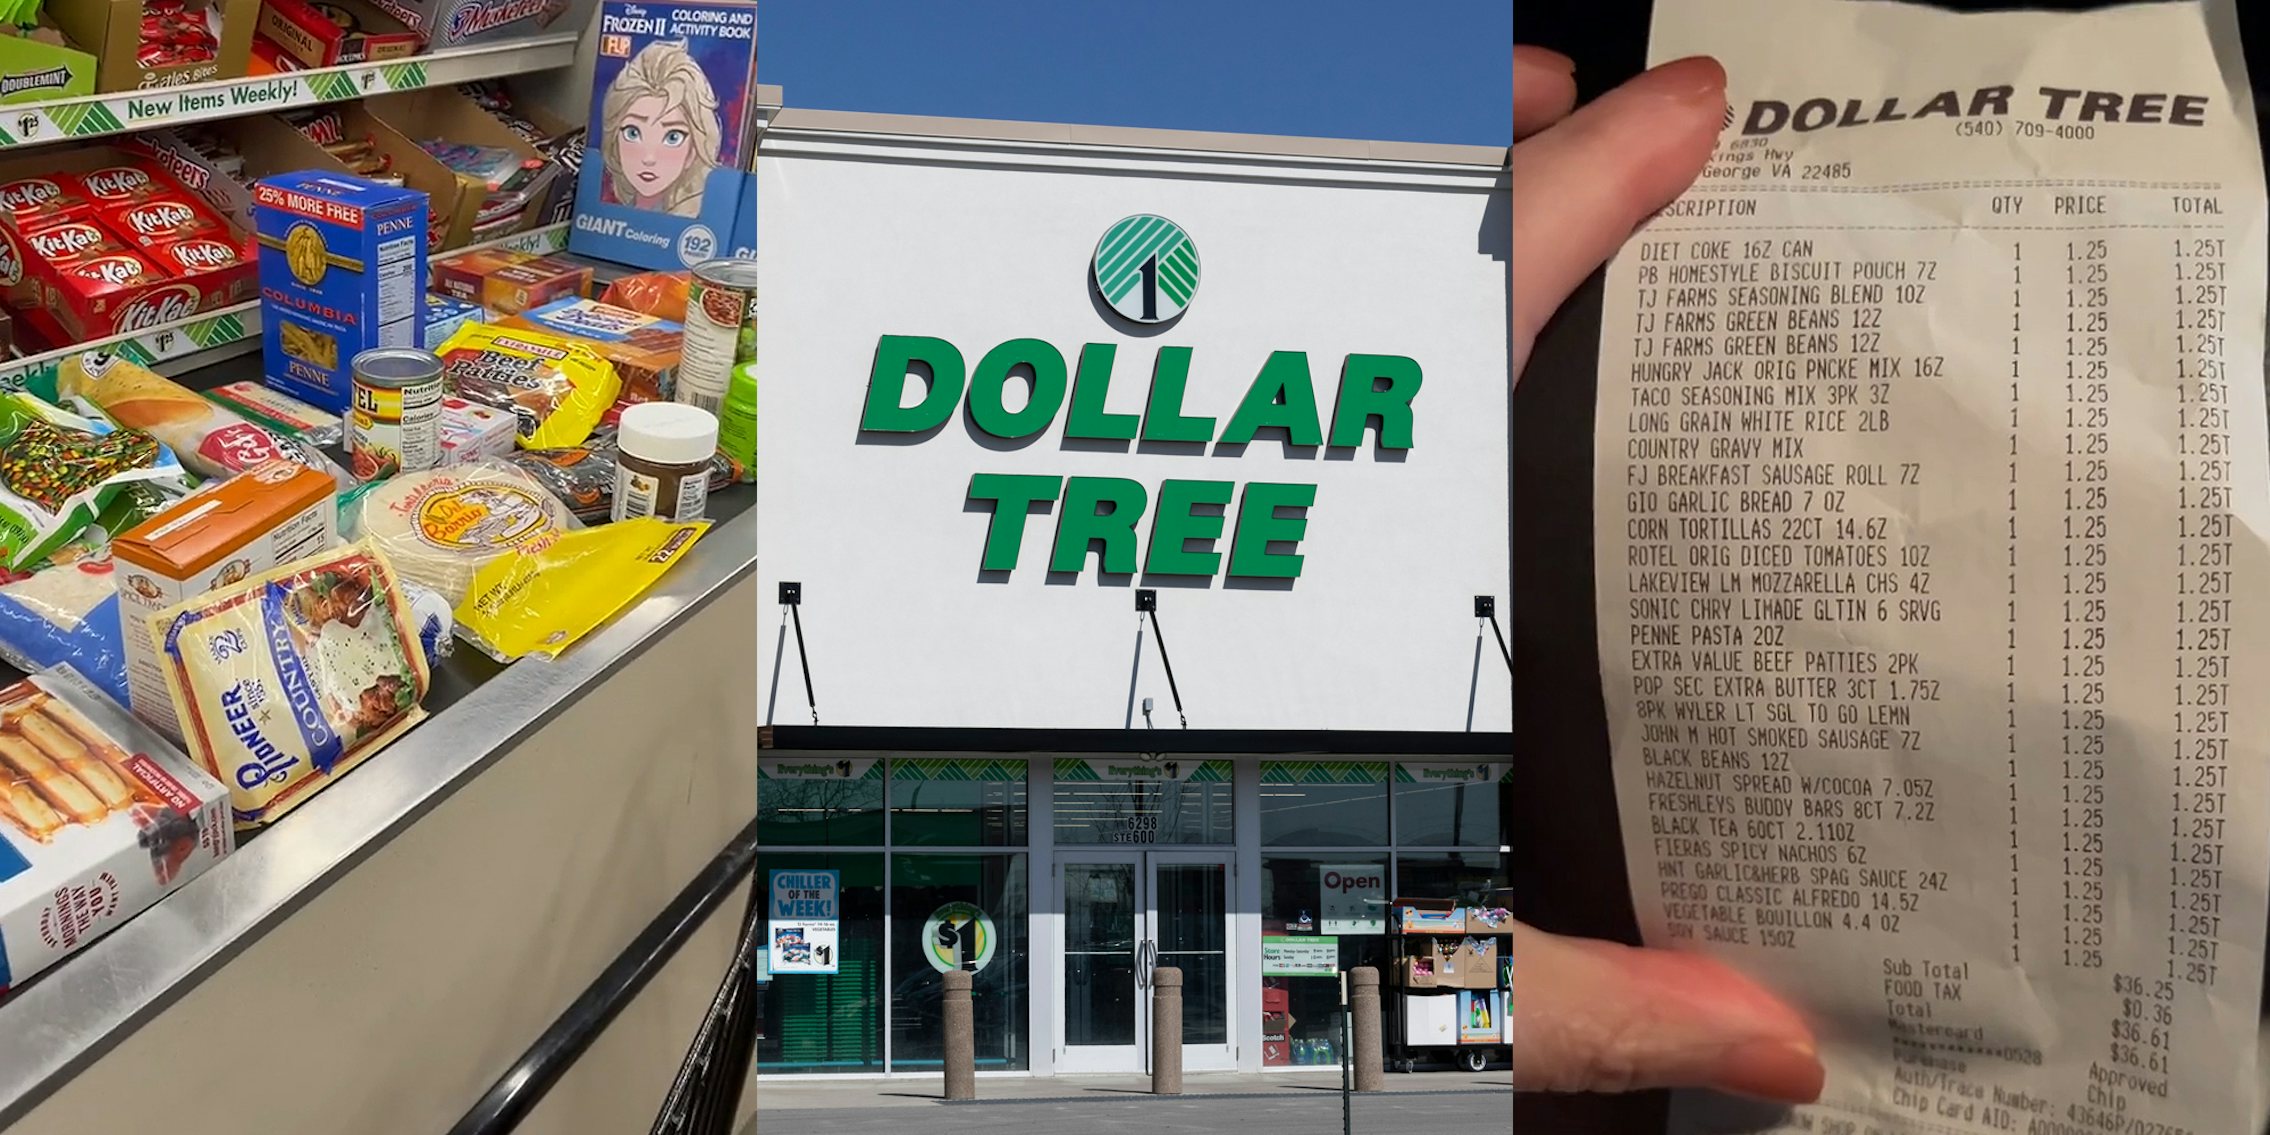 groceries at Dollar Tree checkout (l) Dollar Tree building with sign and blue sky (c) Dollar Tree receipt with $36.25 total (r)